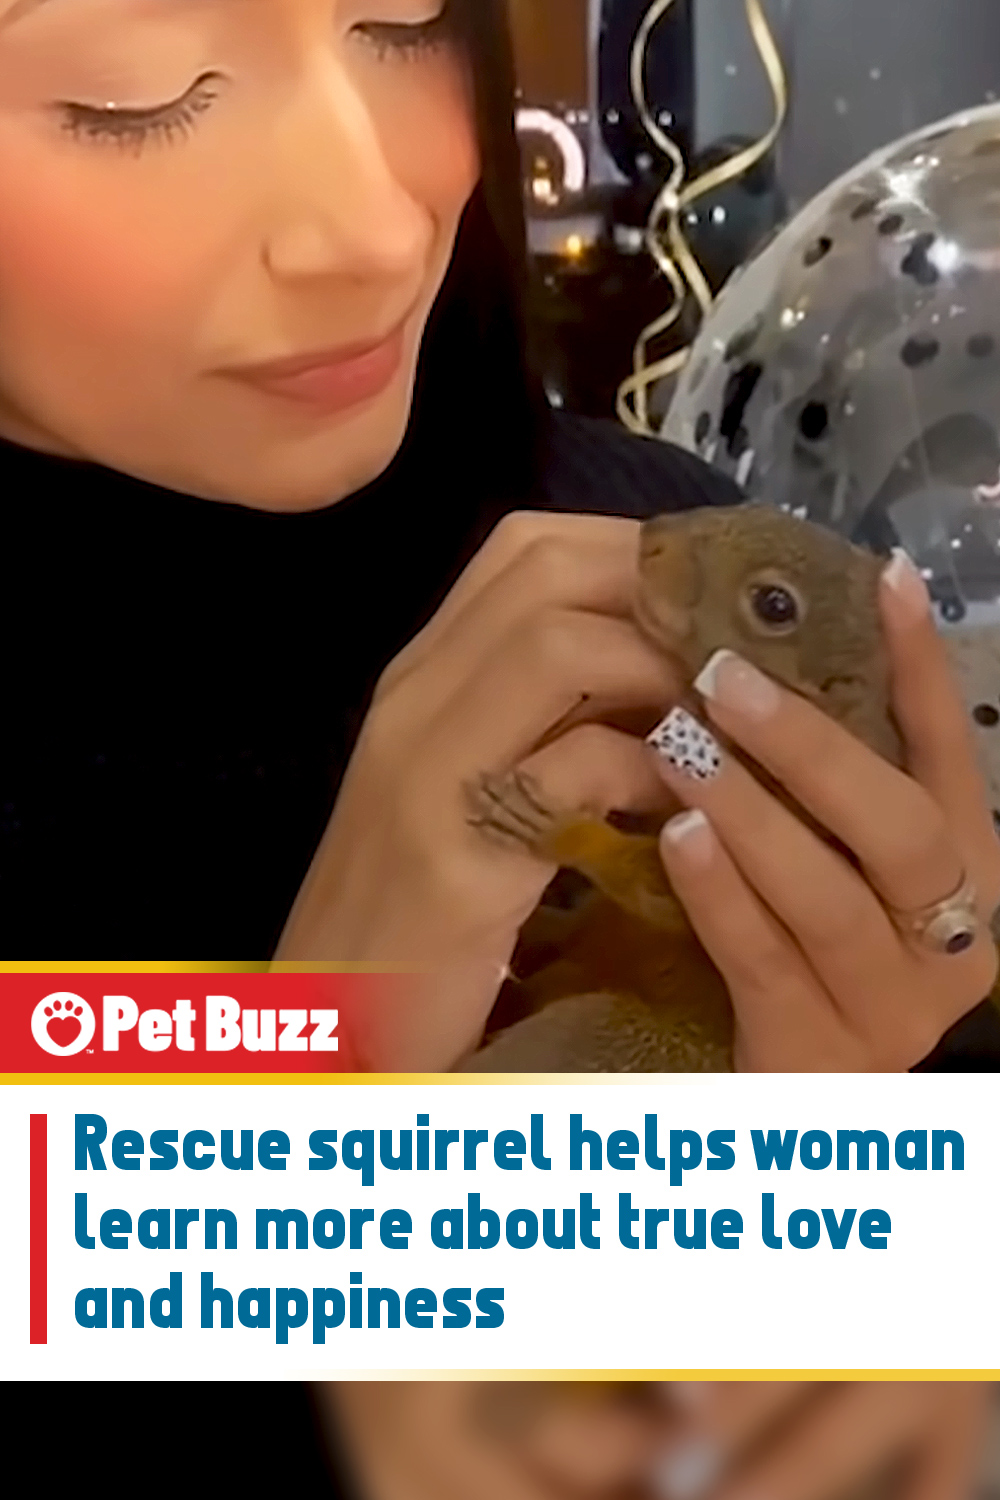 Rescue squirrel helps woman learn more about true love and happiness